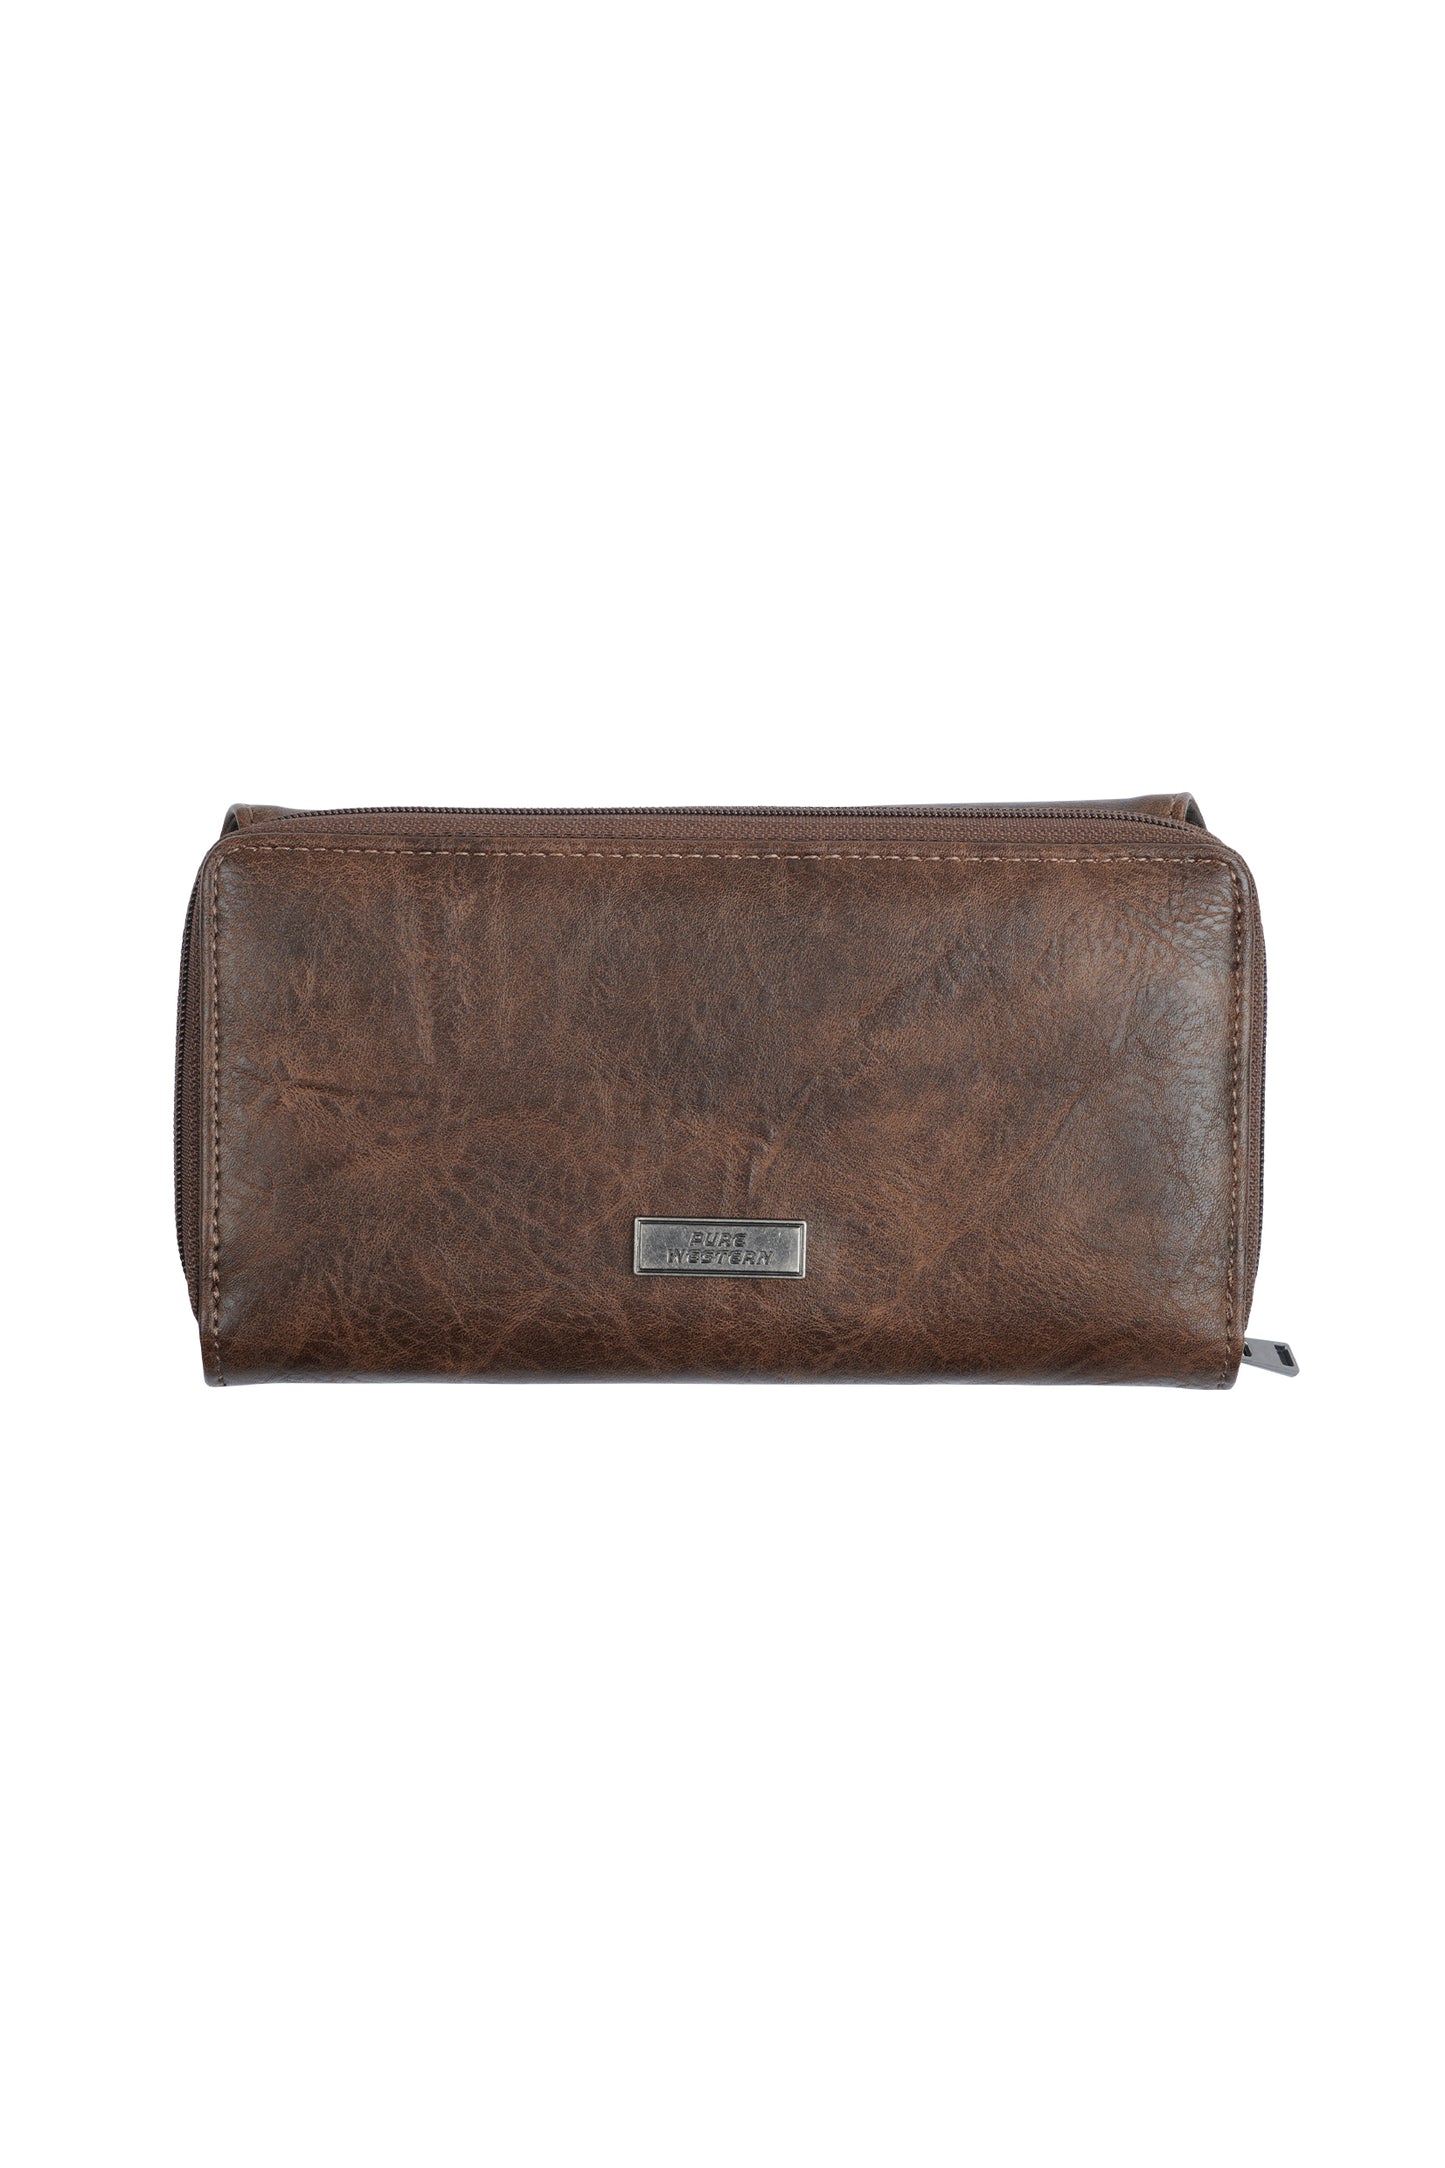 Pure Western Paige Wallet - Chocolate - P4W2987WLT